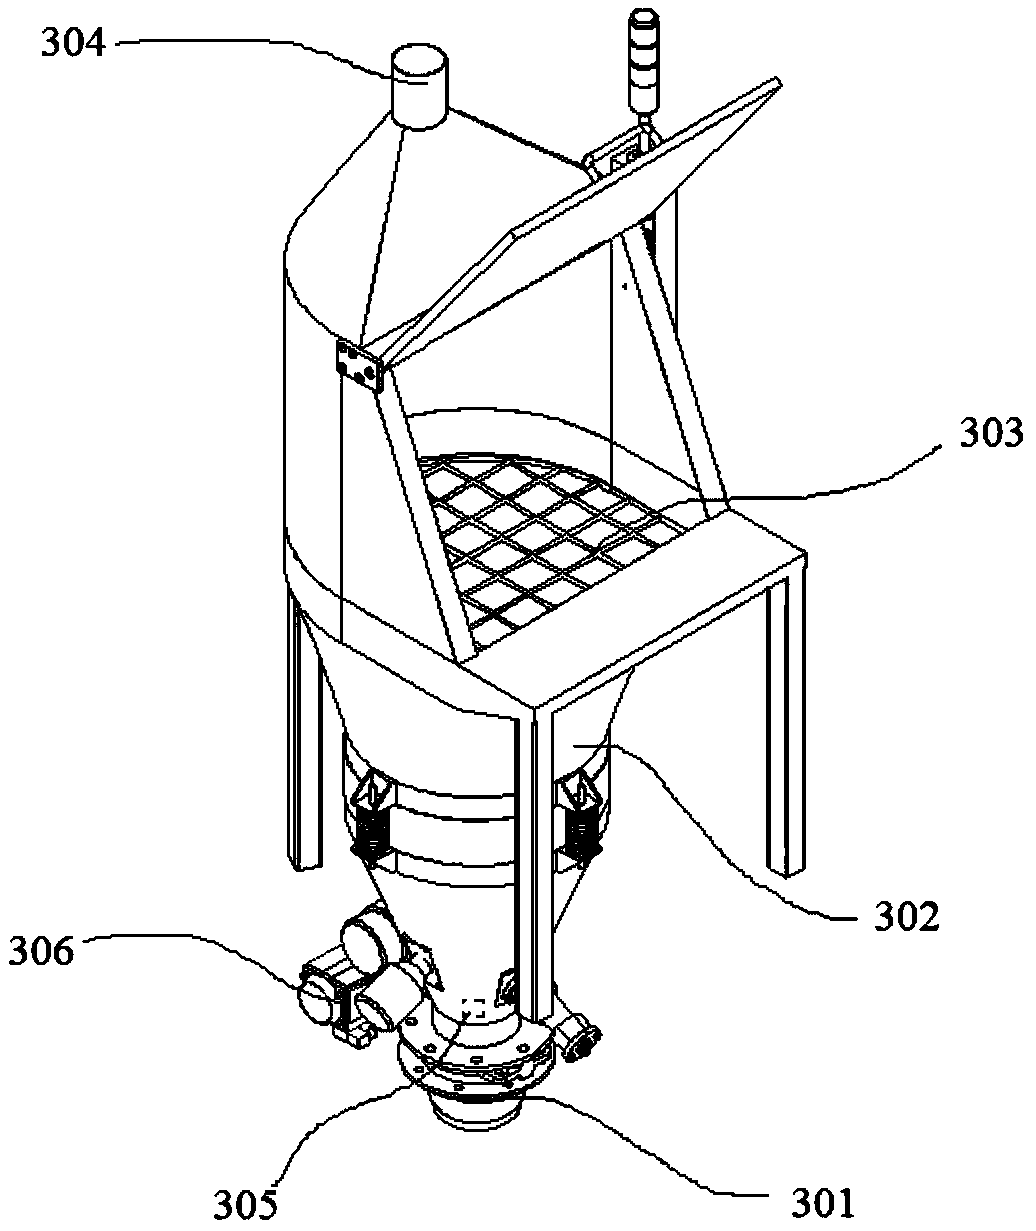 Automatic small-size material blending equipment